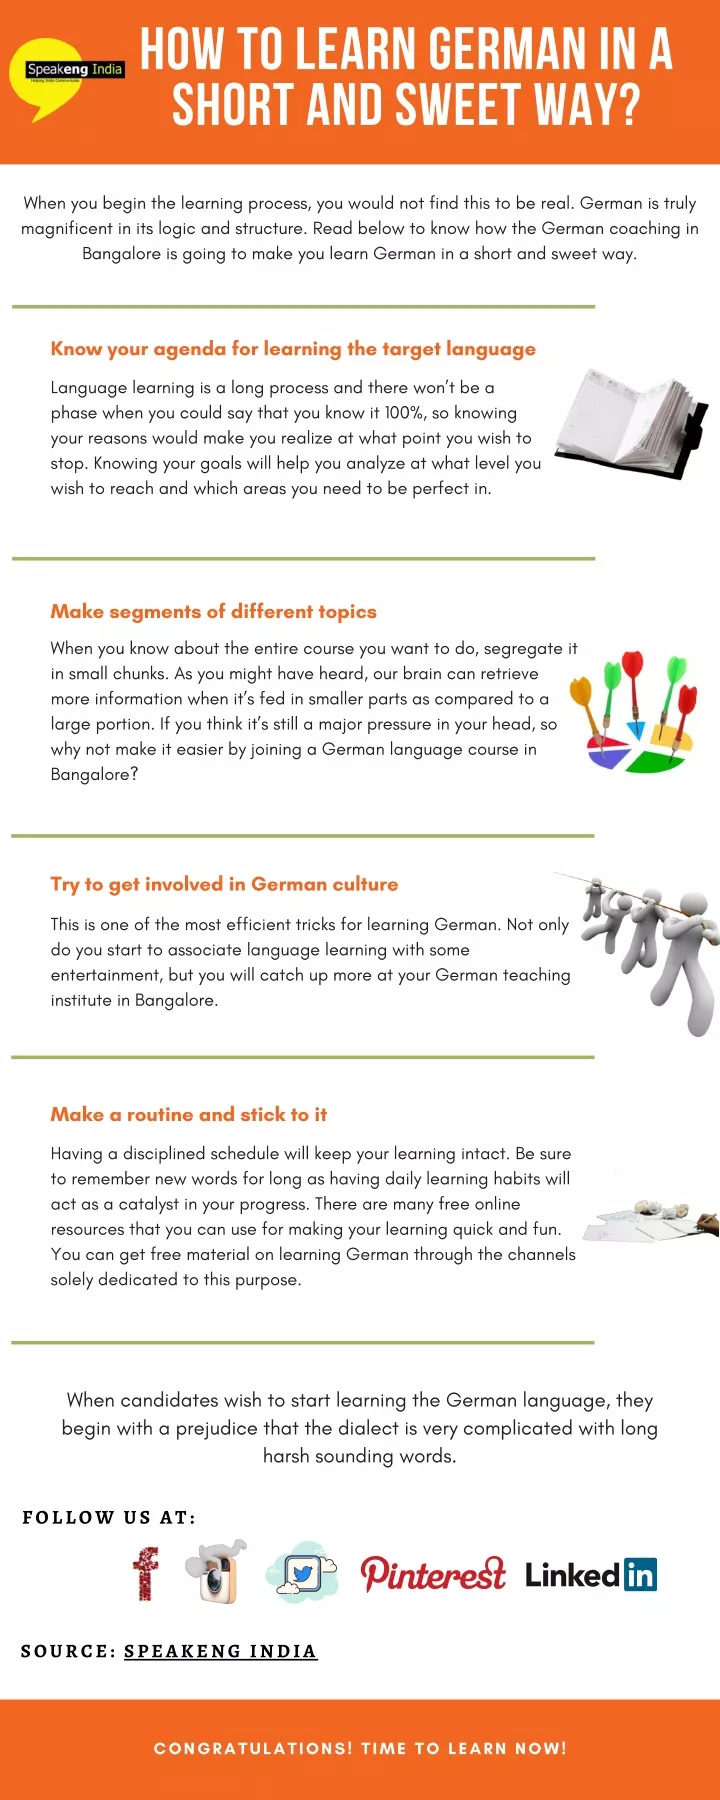 how to learn german in a short and sweet way